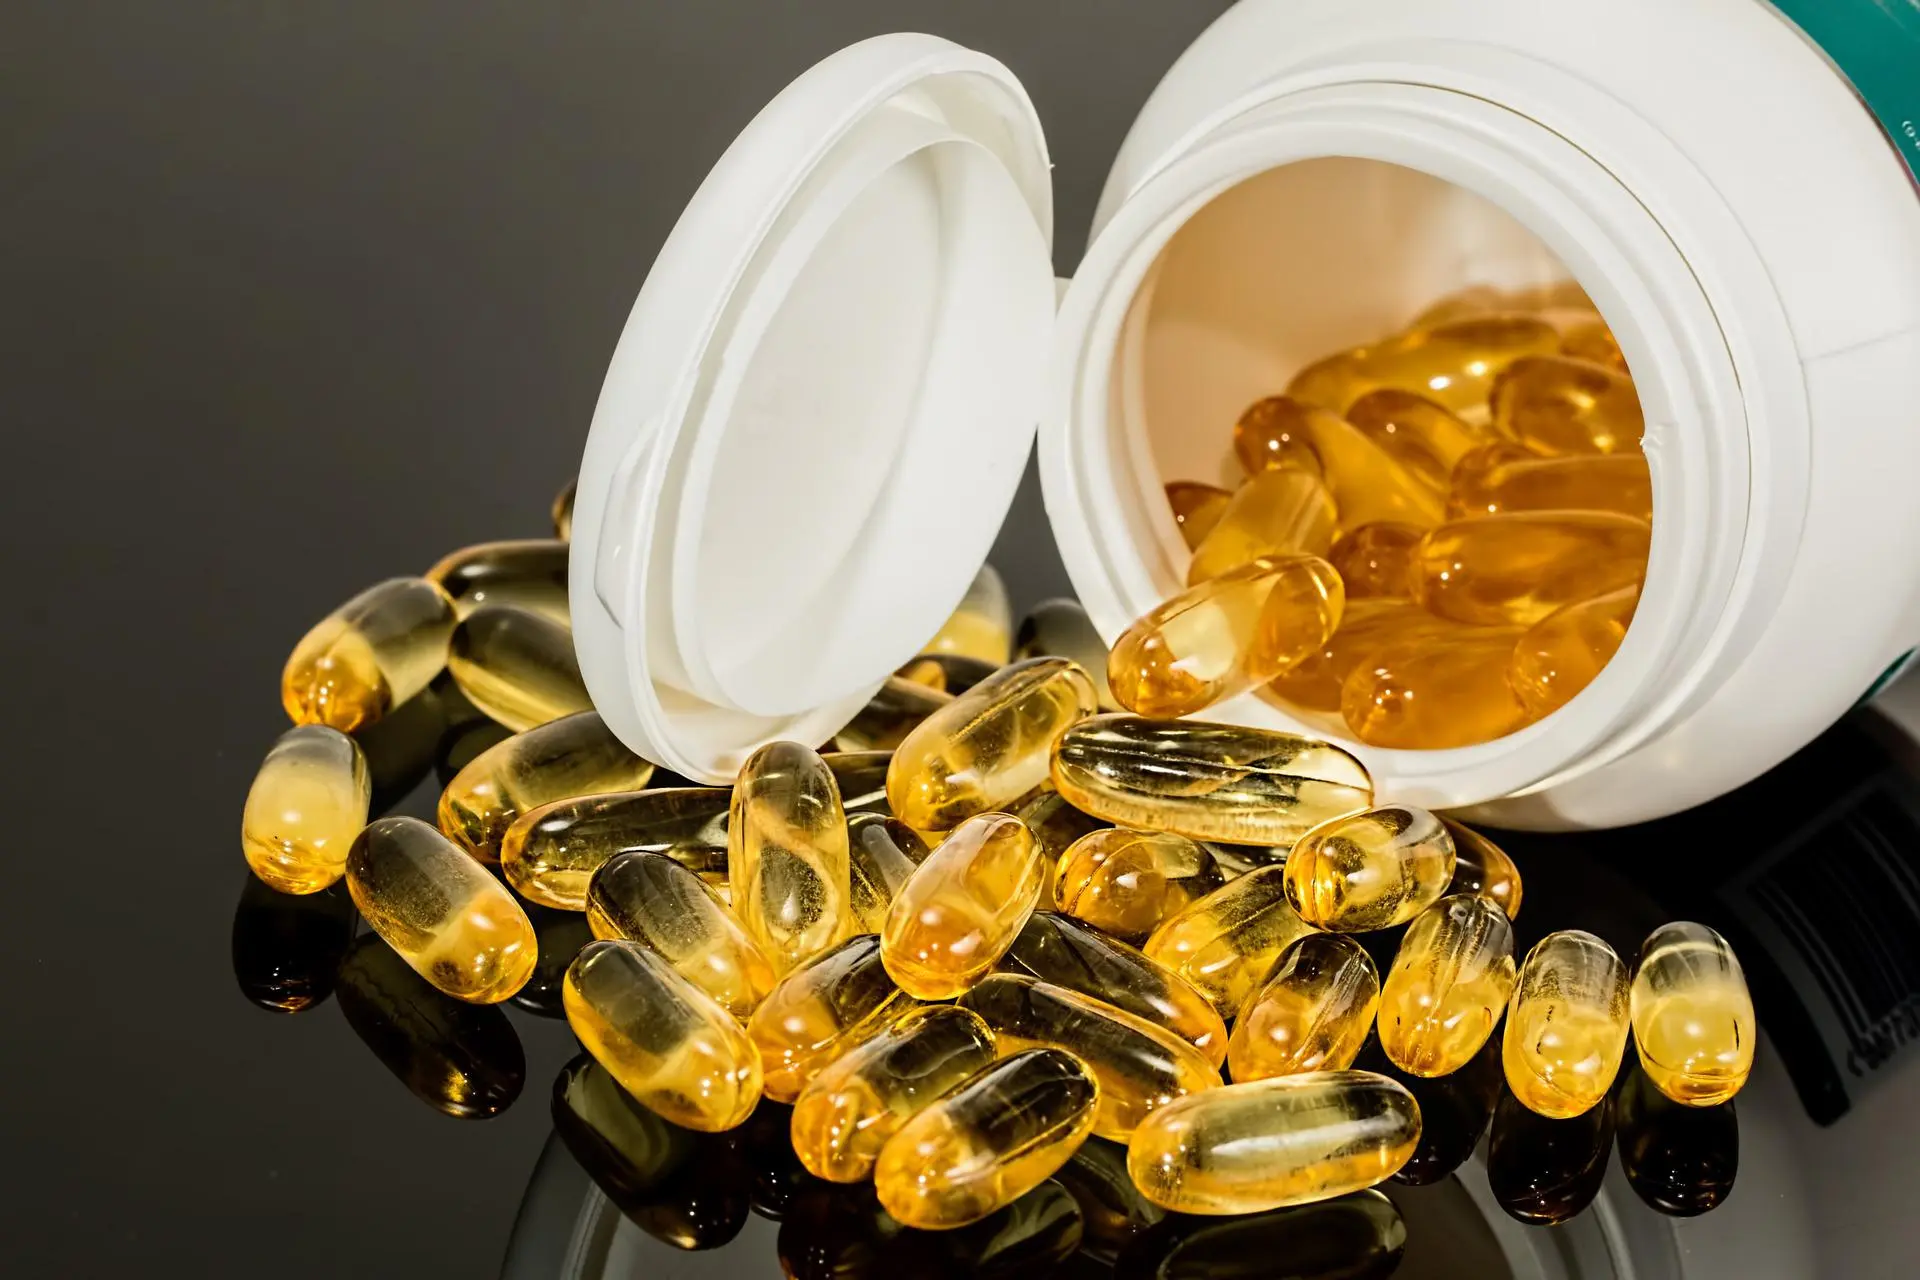 EVERYTHING YOU NEED TO KNOW ABOUT ANTI-AGING SUPPLEMENTS